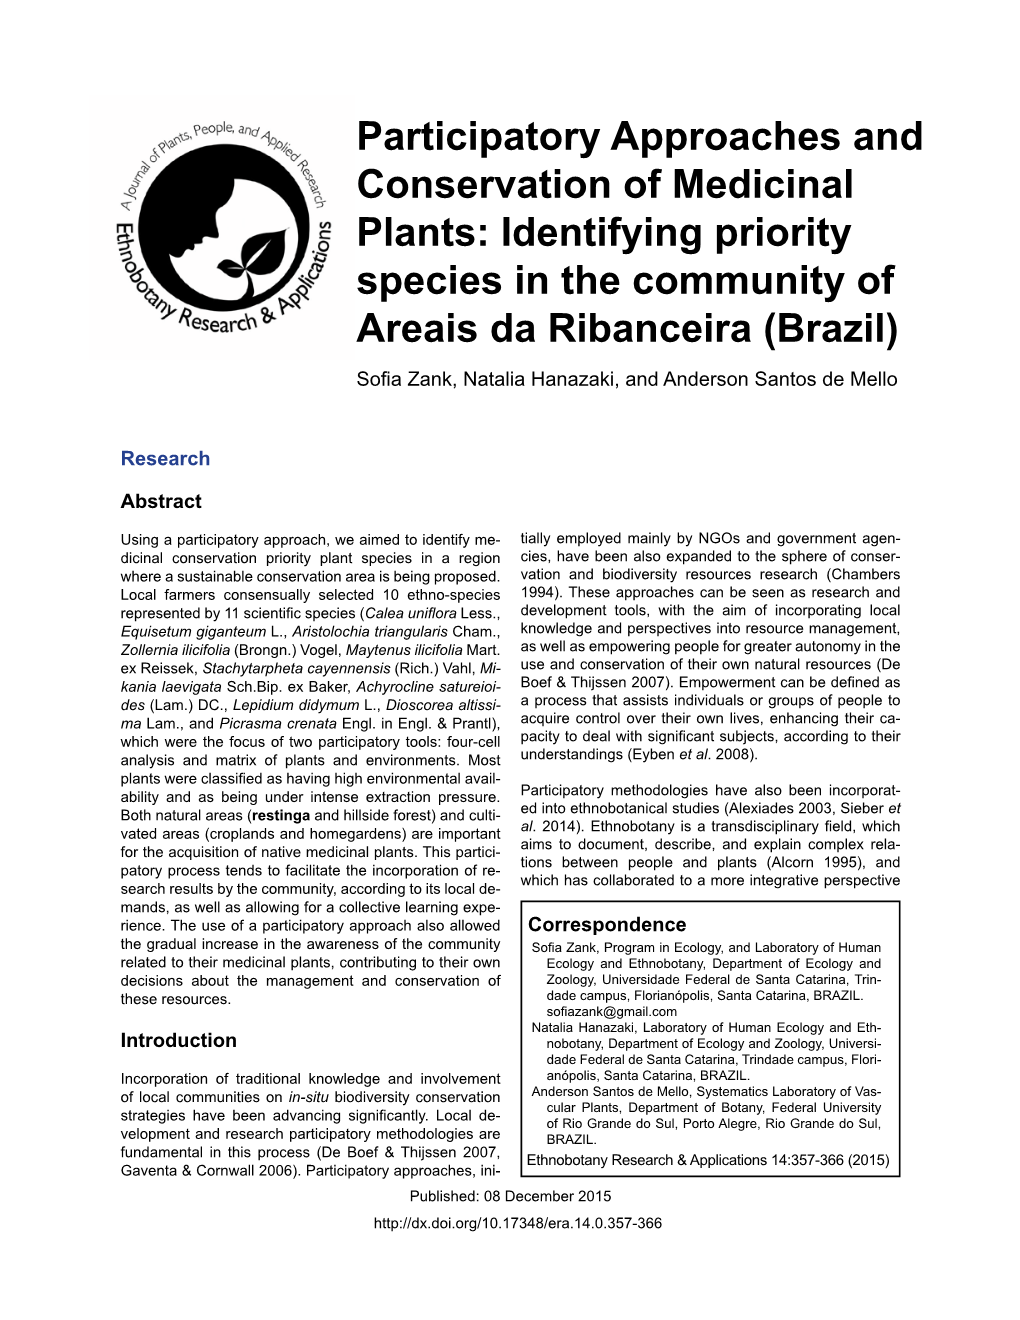 Participatory Approaches and Conservation of Medicinal Plants